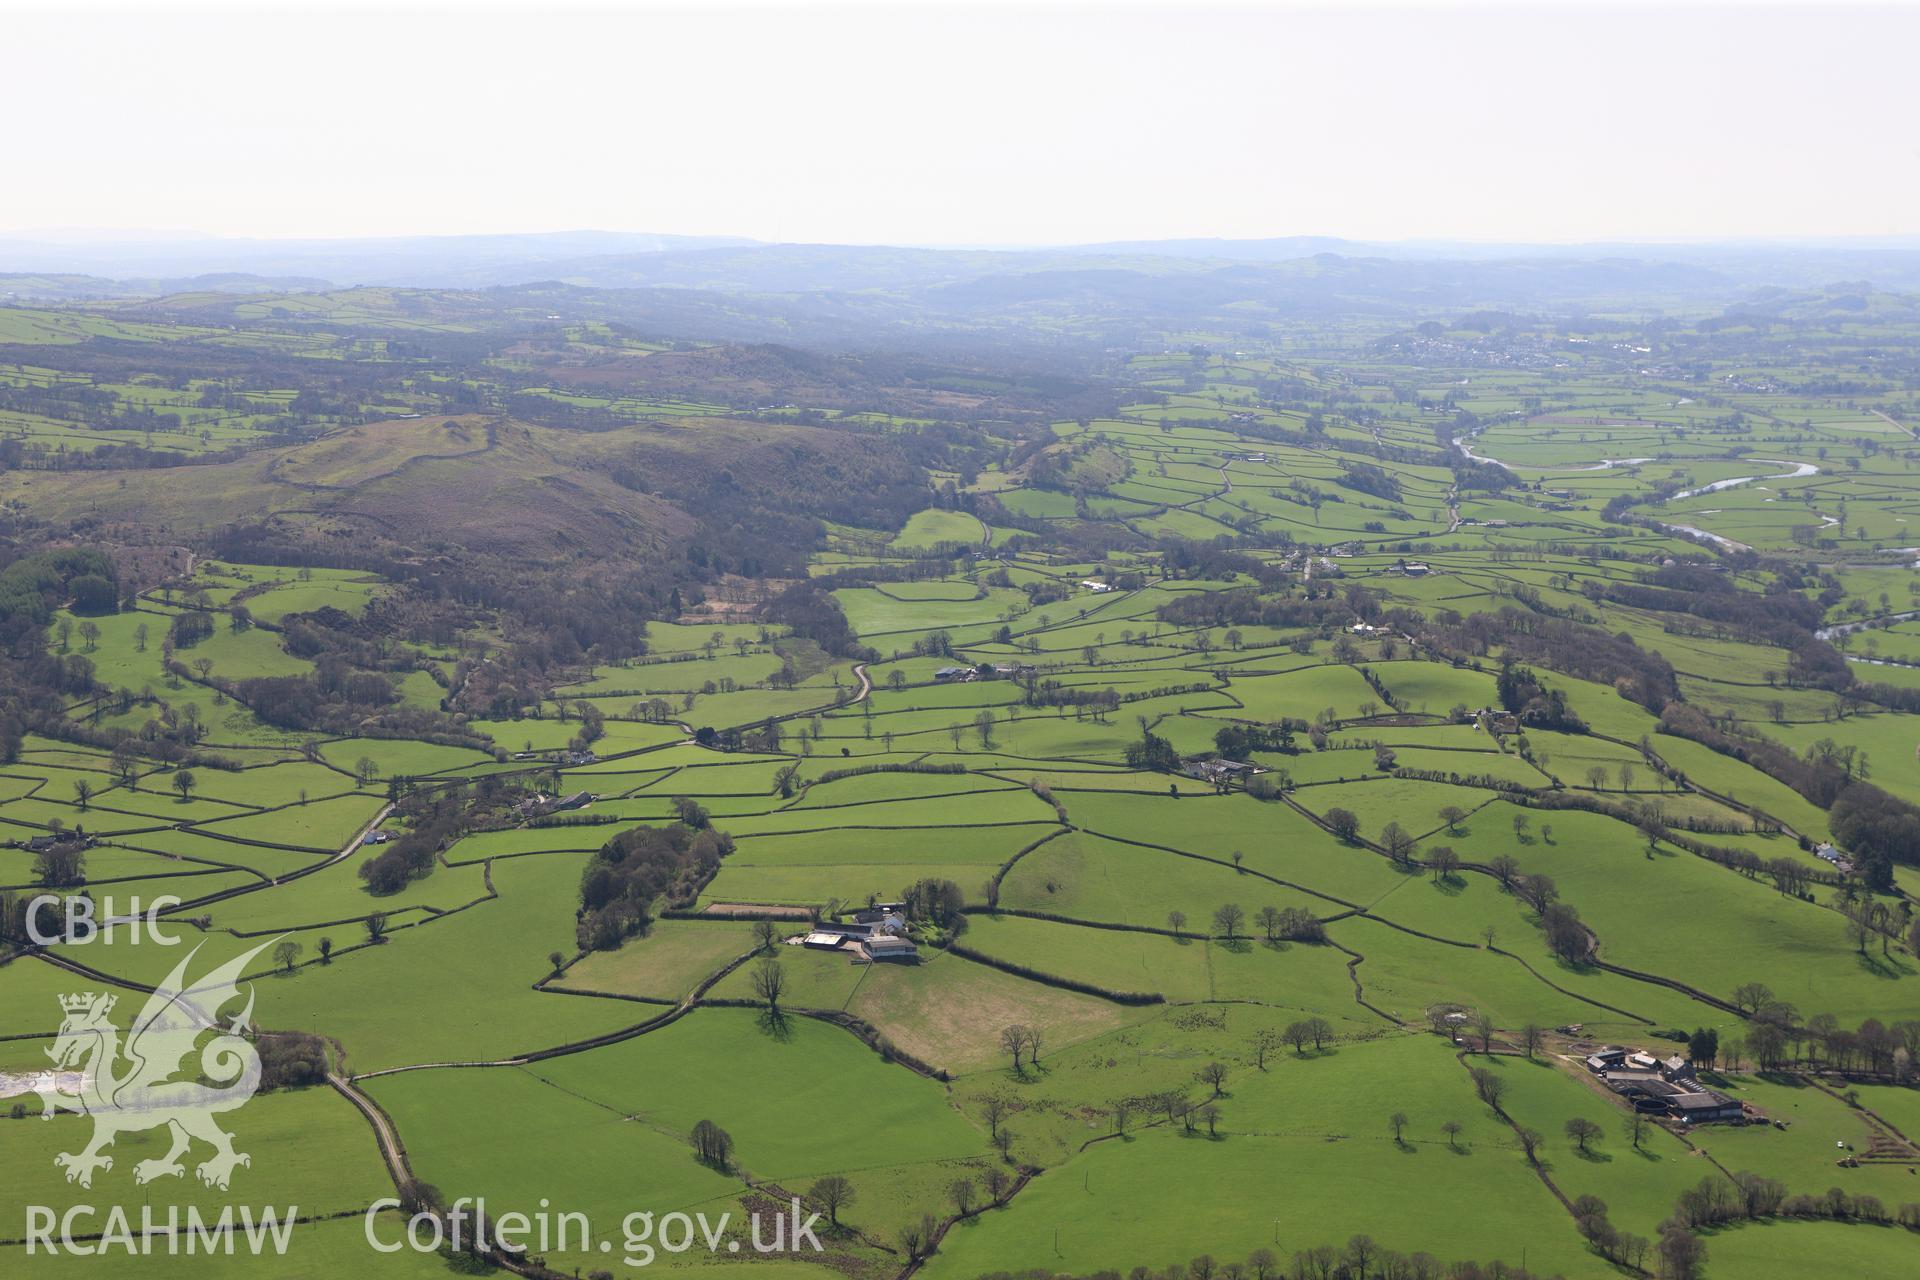 RCAHMW colour oblique photograph of View along Tywi Valley, looking southwest. Taken by Toby Driver on 08/04/2011.